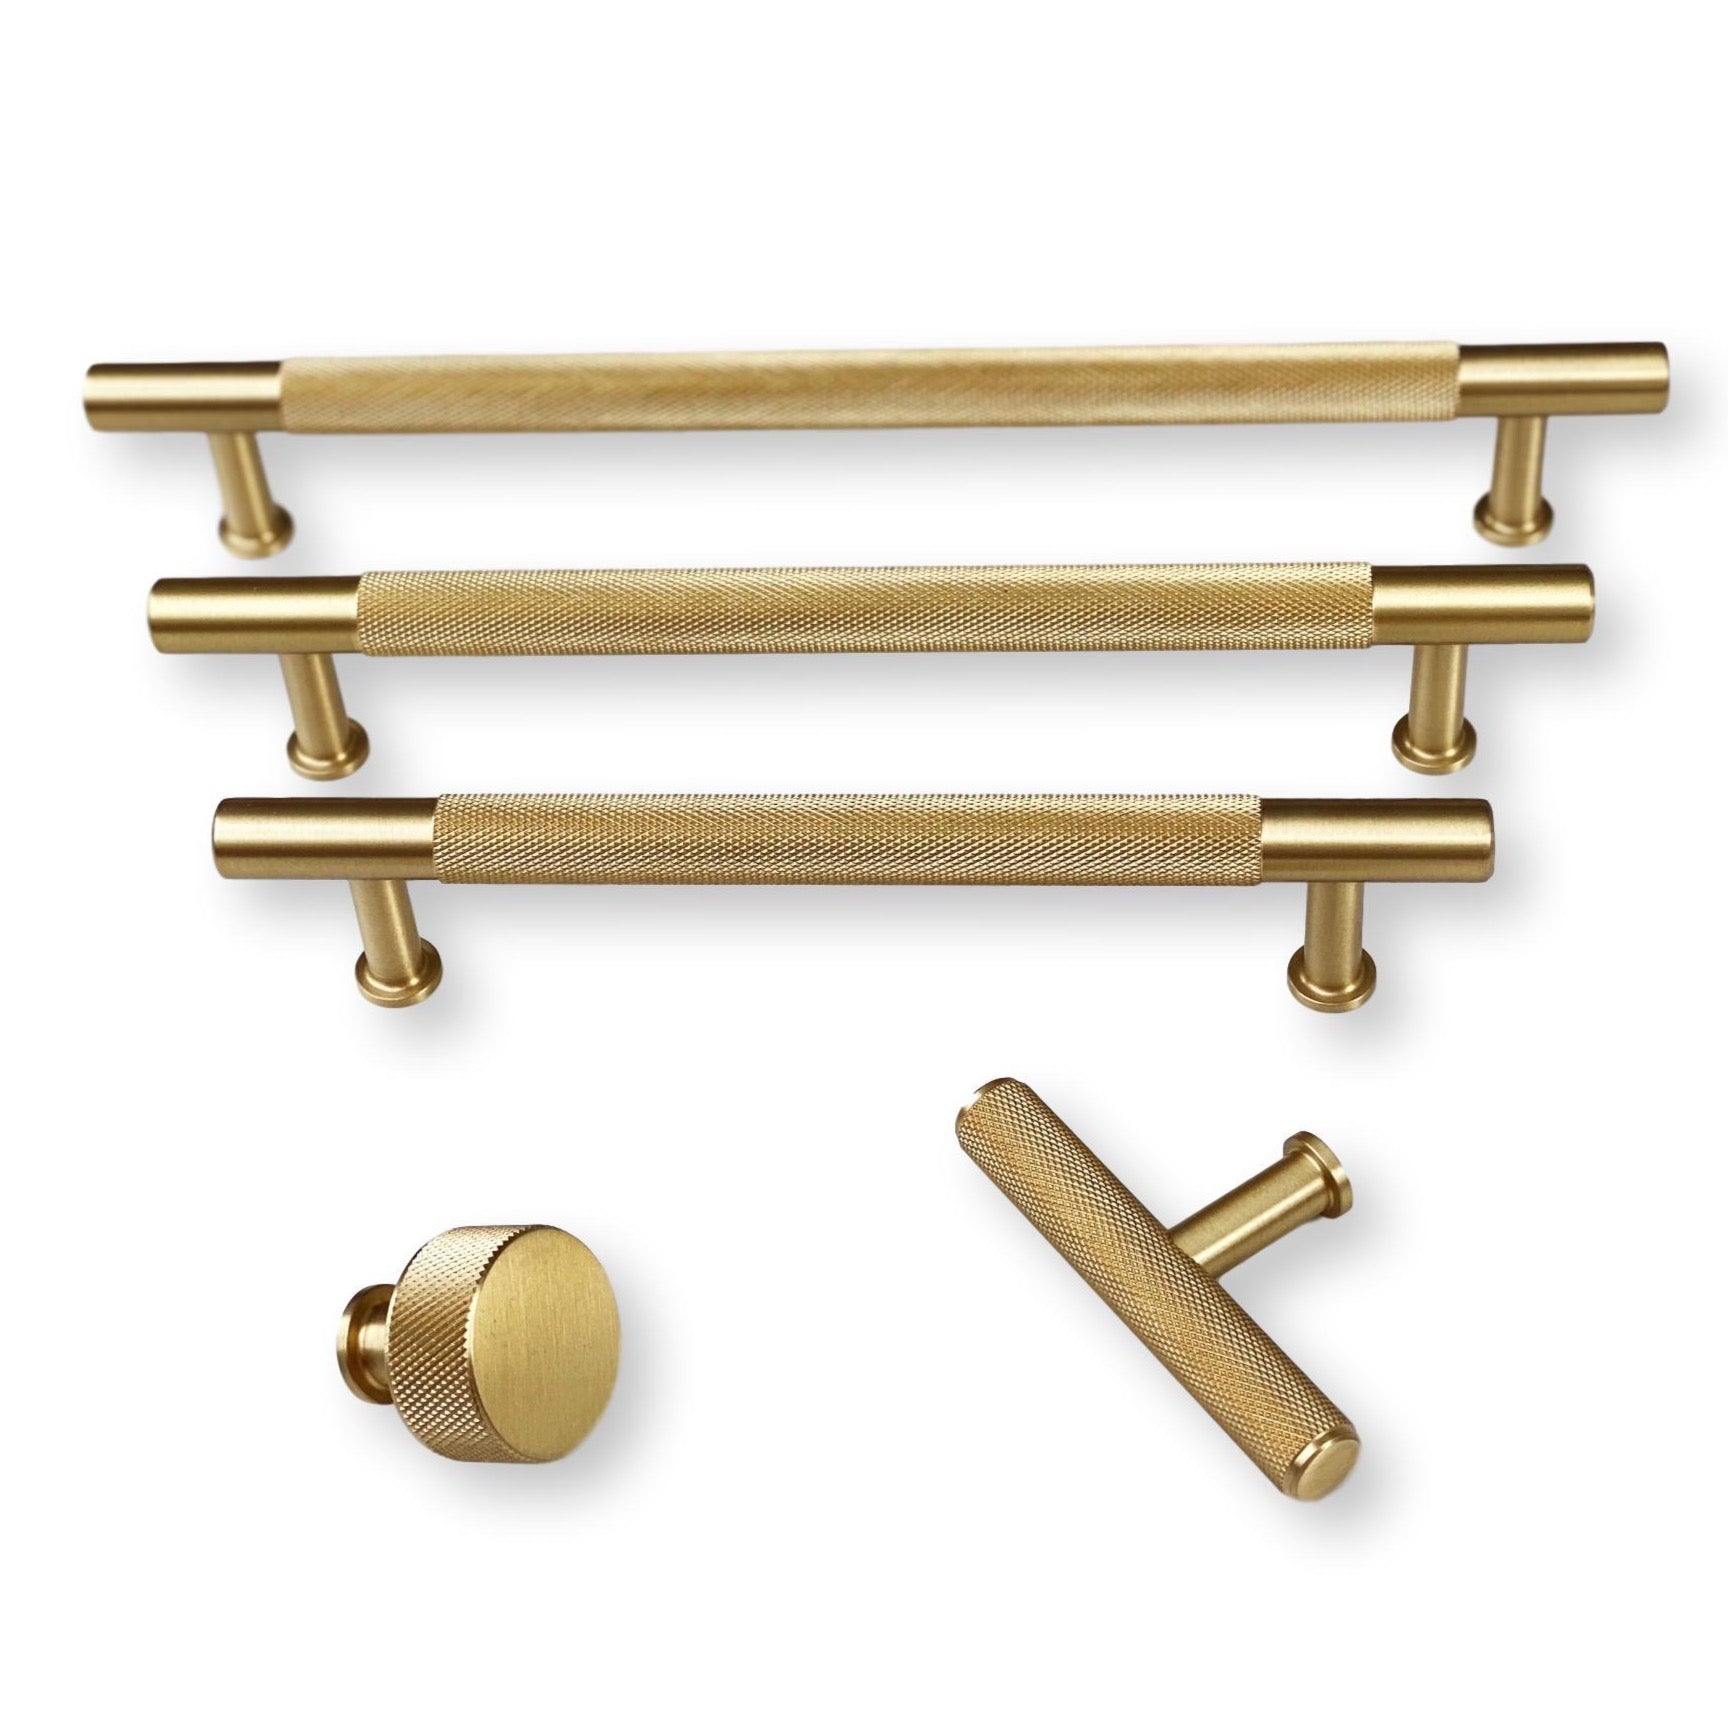 Brass Solid Texture No.2 Knurled Drawer Pulls and Knobs in Satin Brass